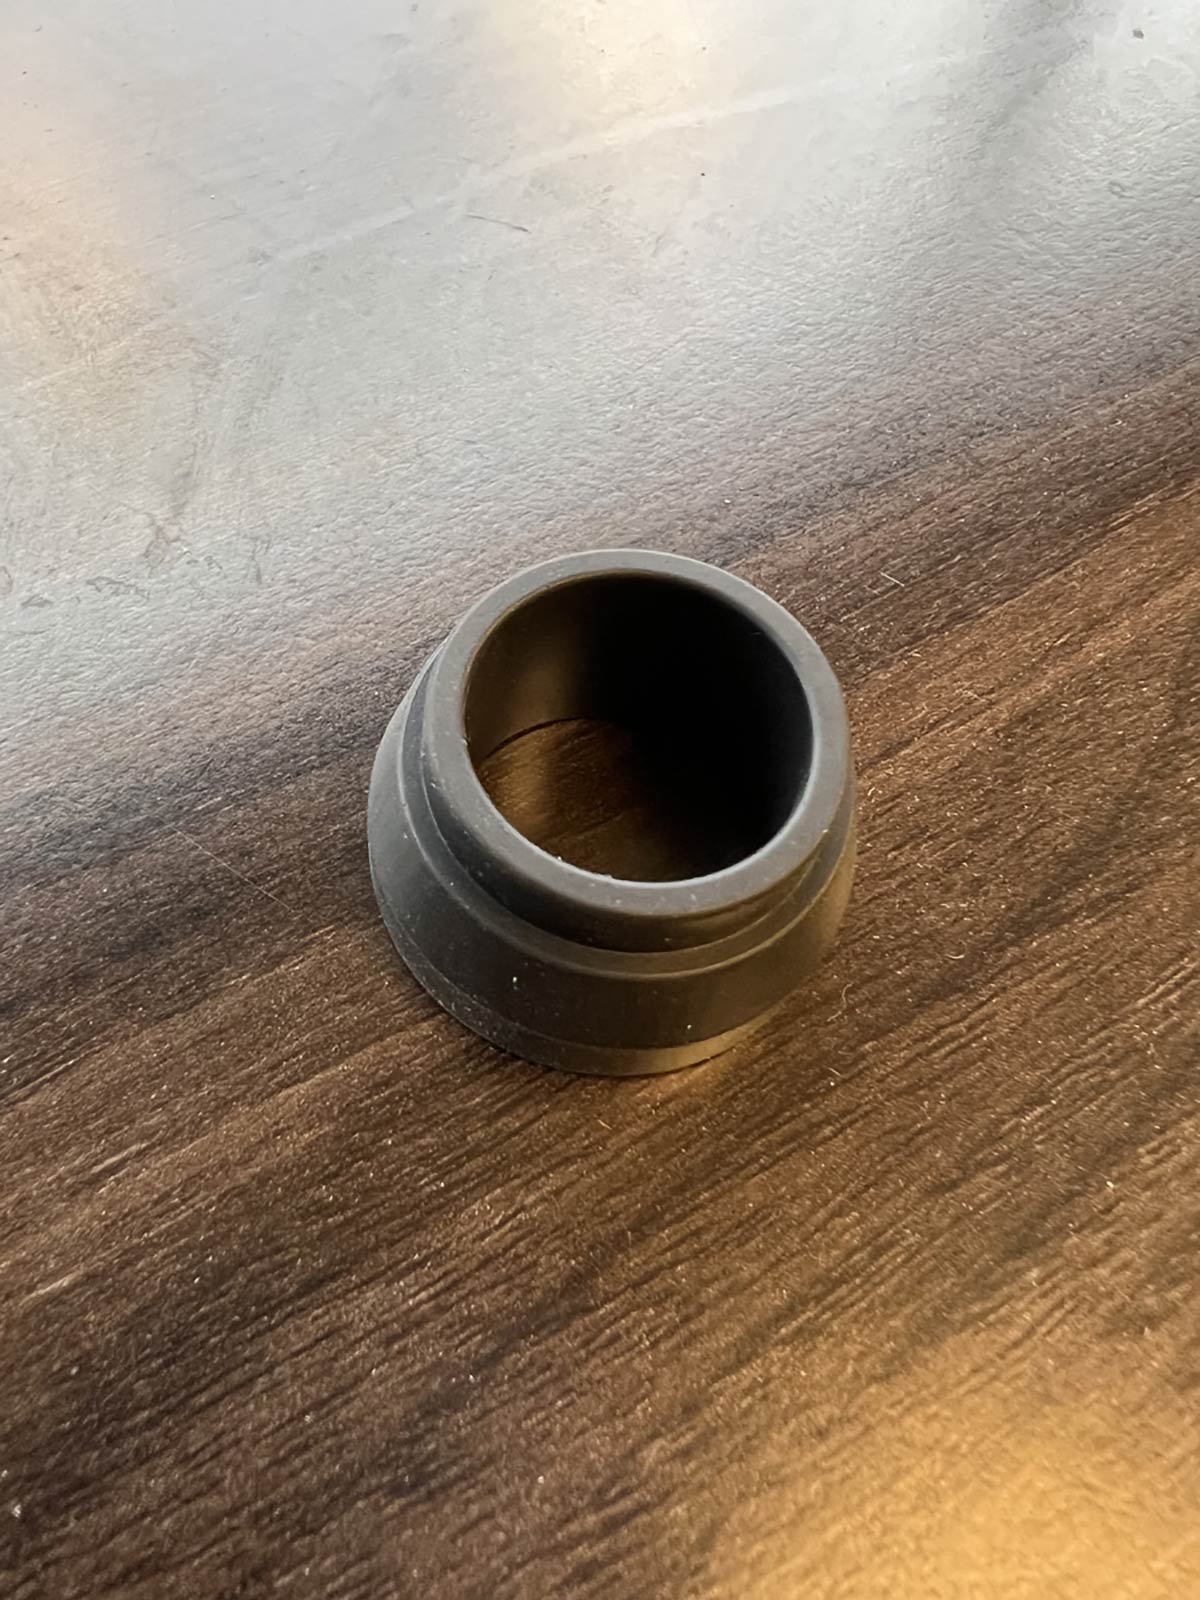 single small black injection molded rubber automotive grommet part prior to assembly